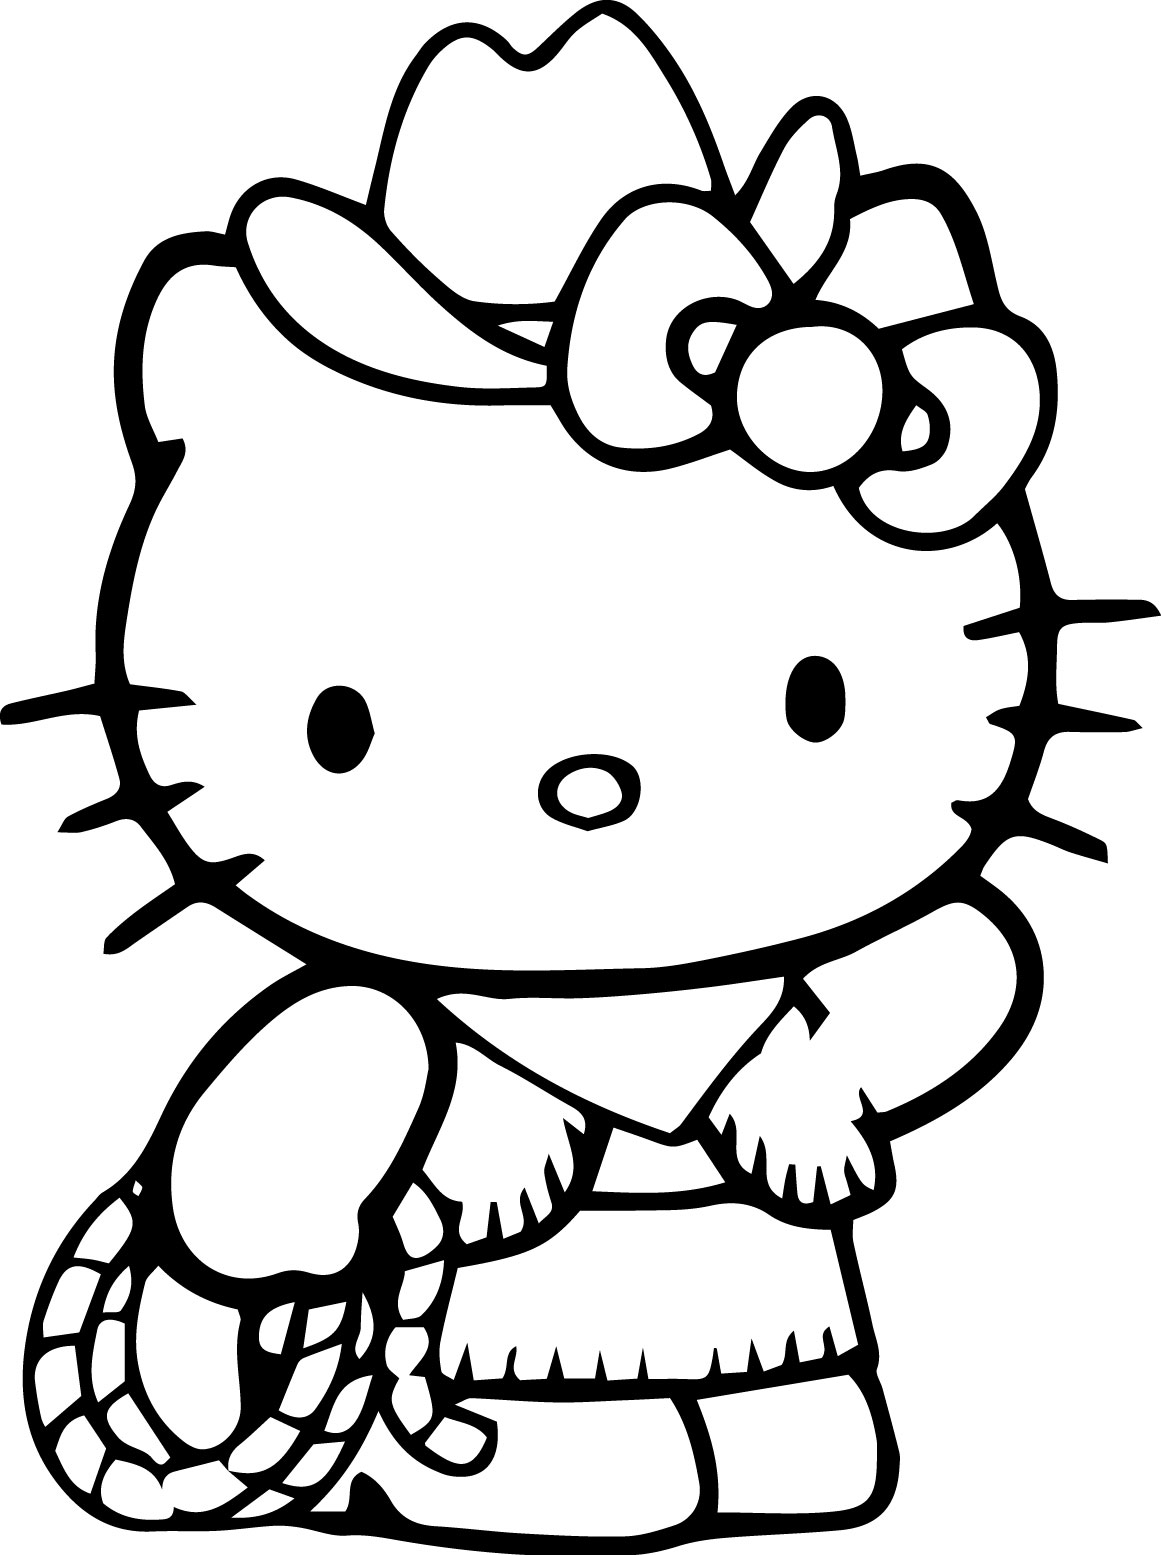 hello-kitty-coloring-pages-images-at-getdrawings-free-download